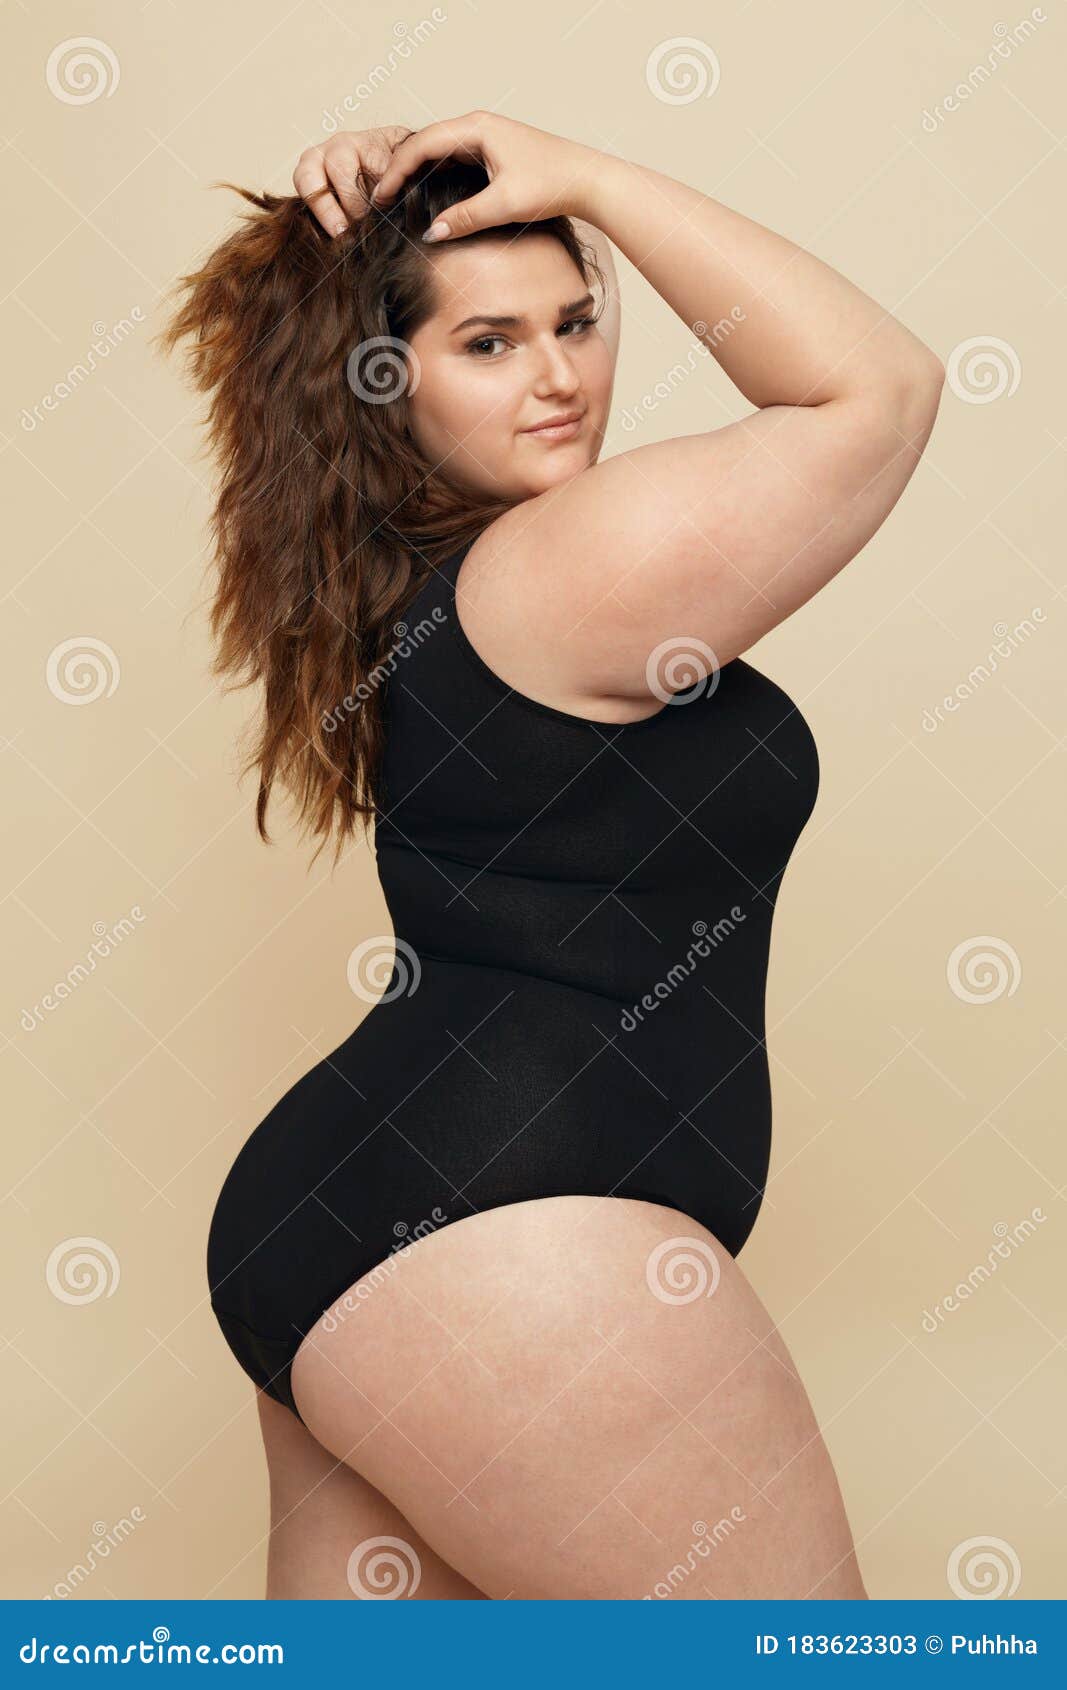 Girls In Bodysuits Stock Photo, Picture and Royalty Free Image. Image  113326415.